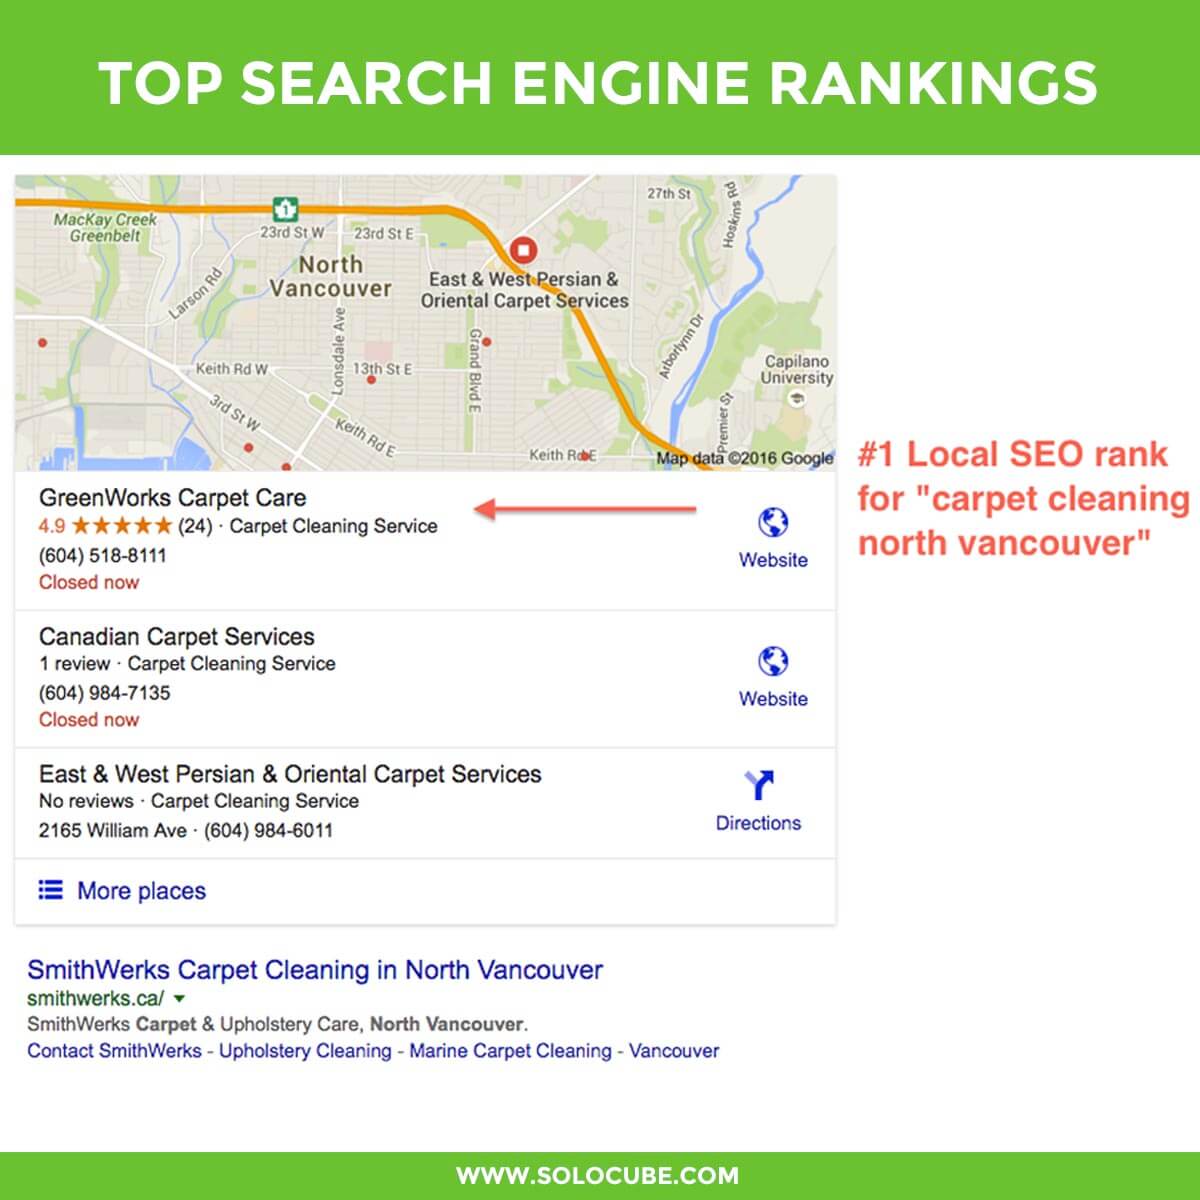 top google ranking 01 - Vancouver SEO - Search Engine Optimization